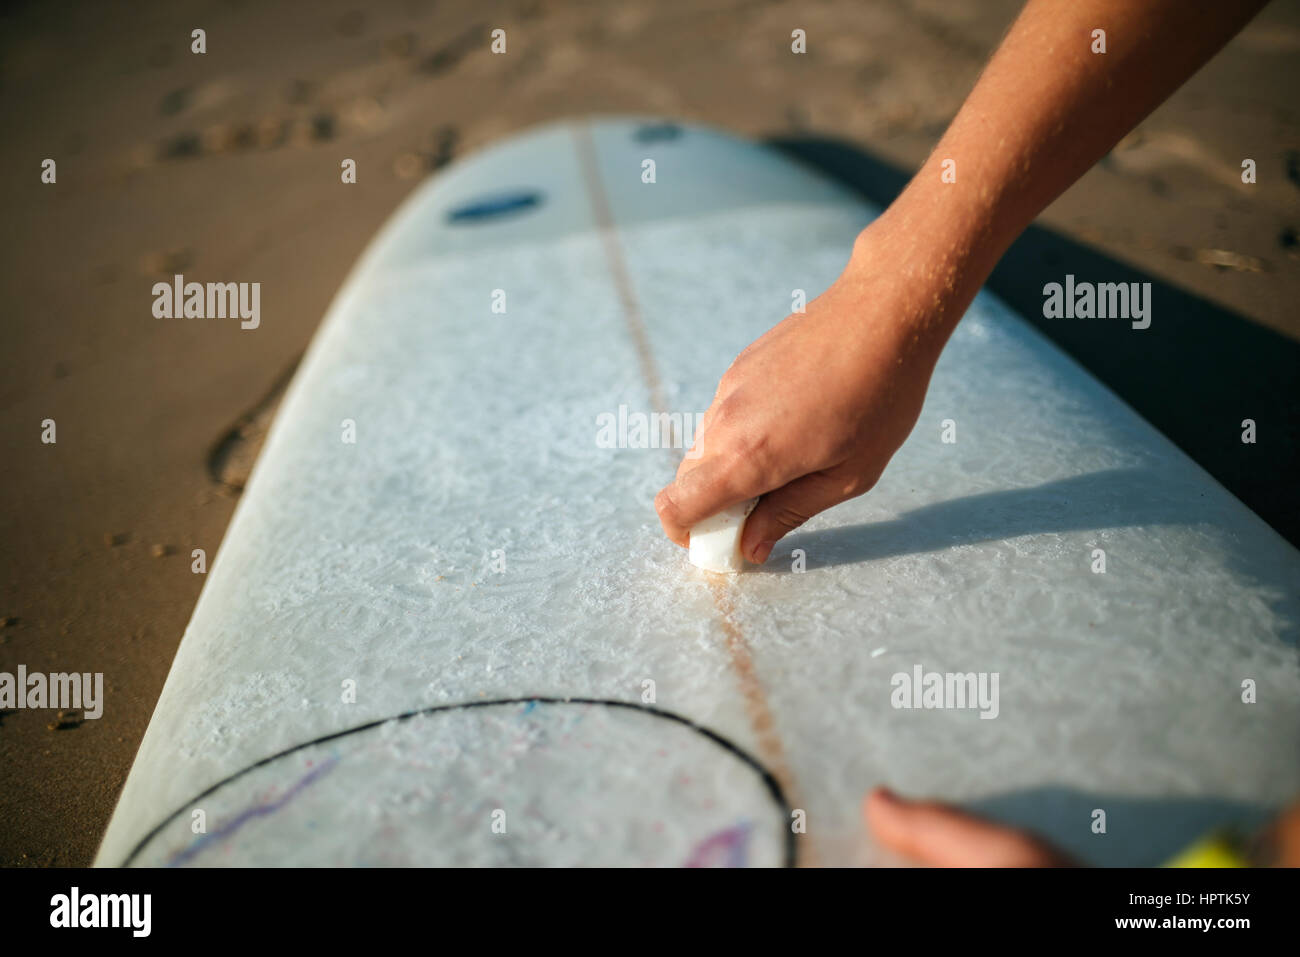 Woman's hand applying paraffin on  surfboard, close-up Stock Photo